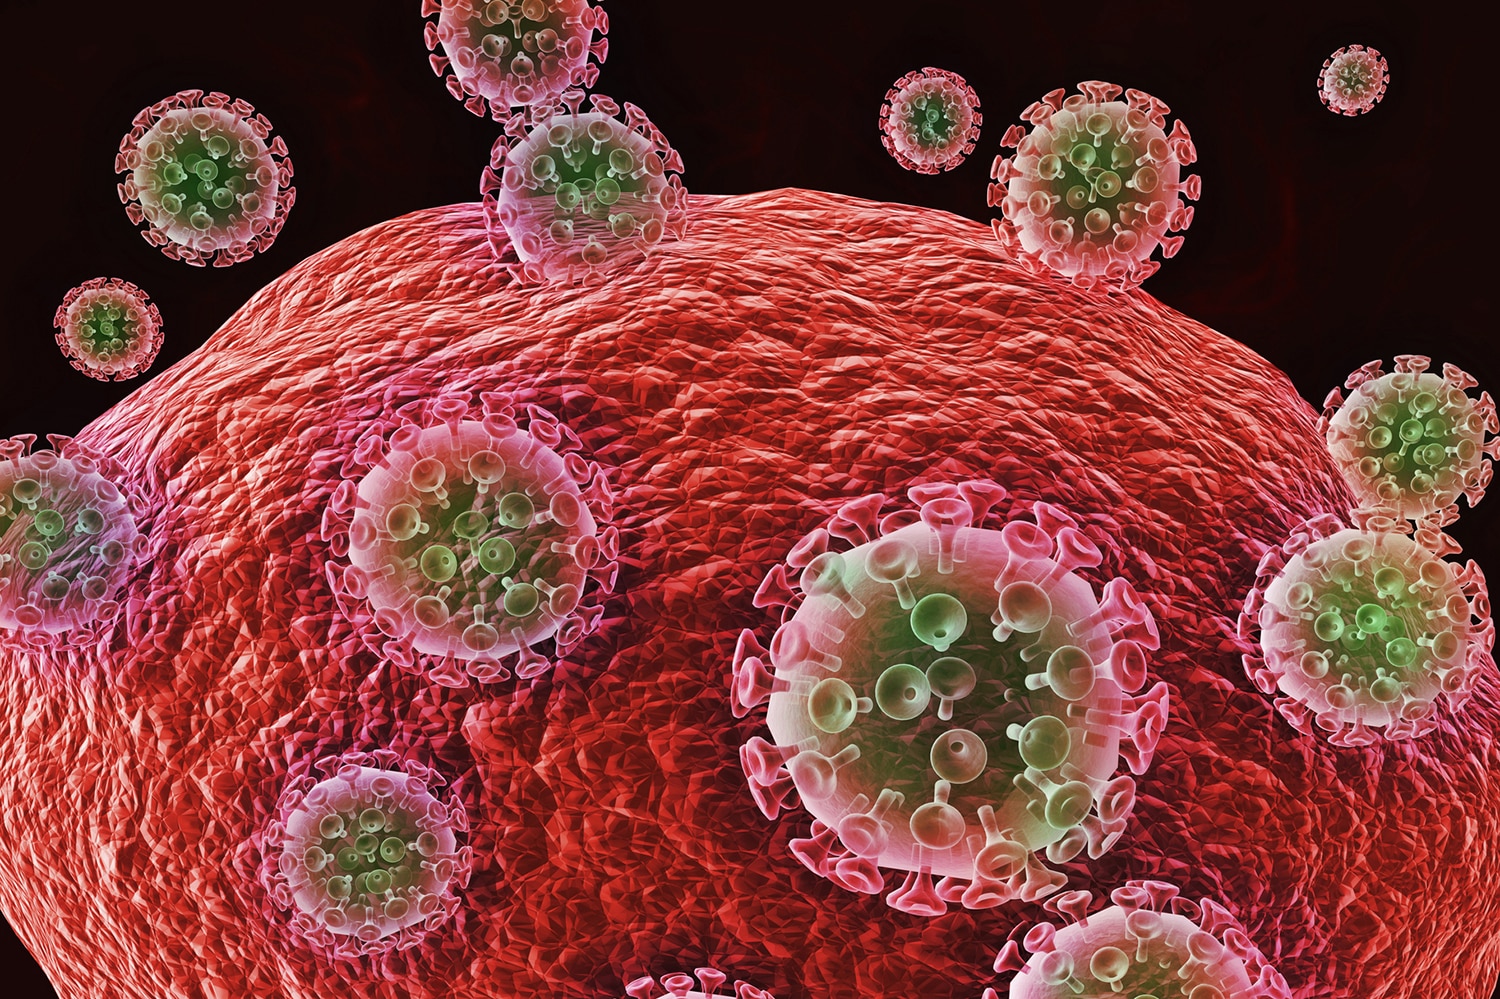 Many Cancers in HIV-Positive Patients Go Untreated